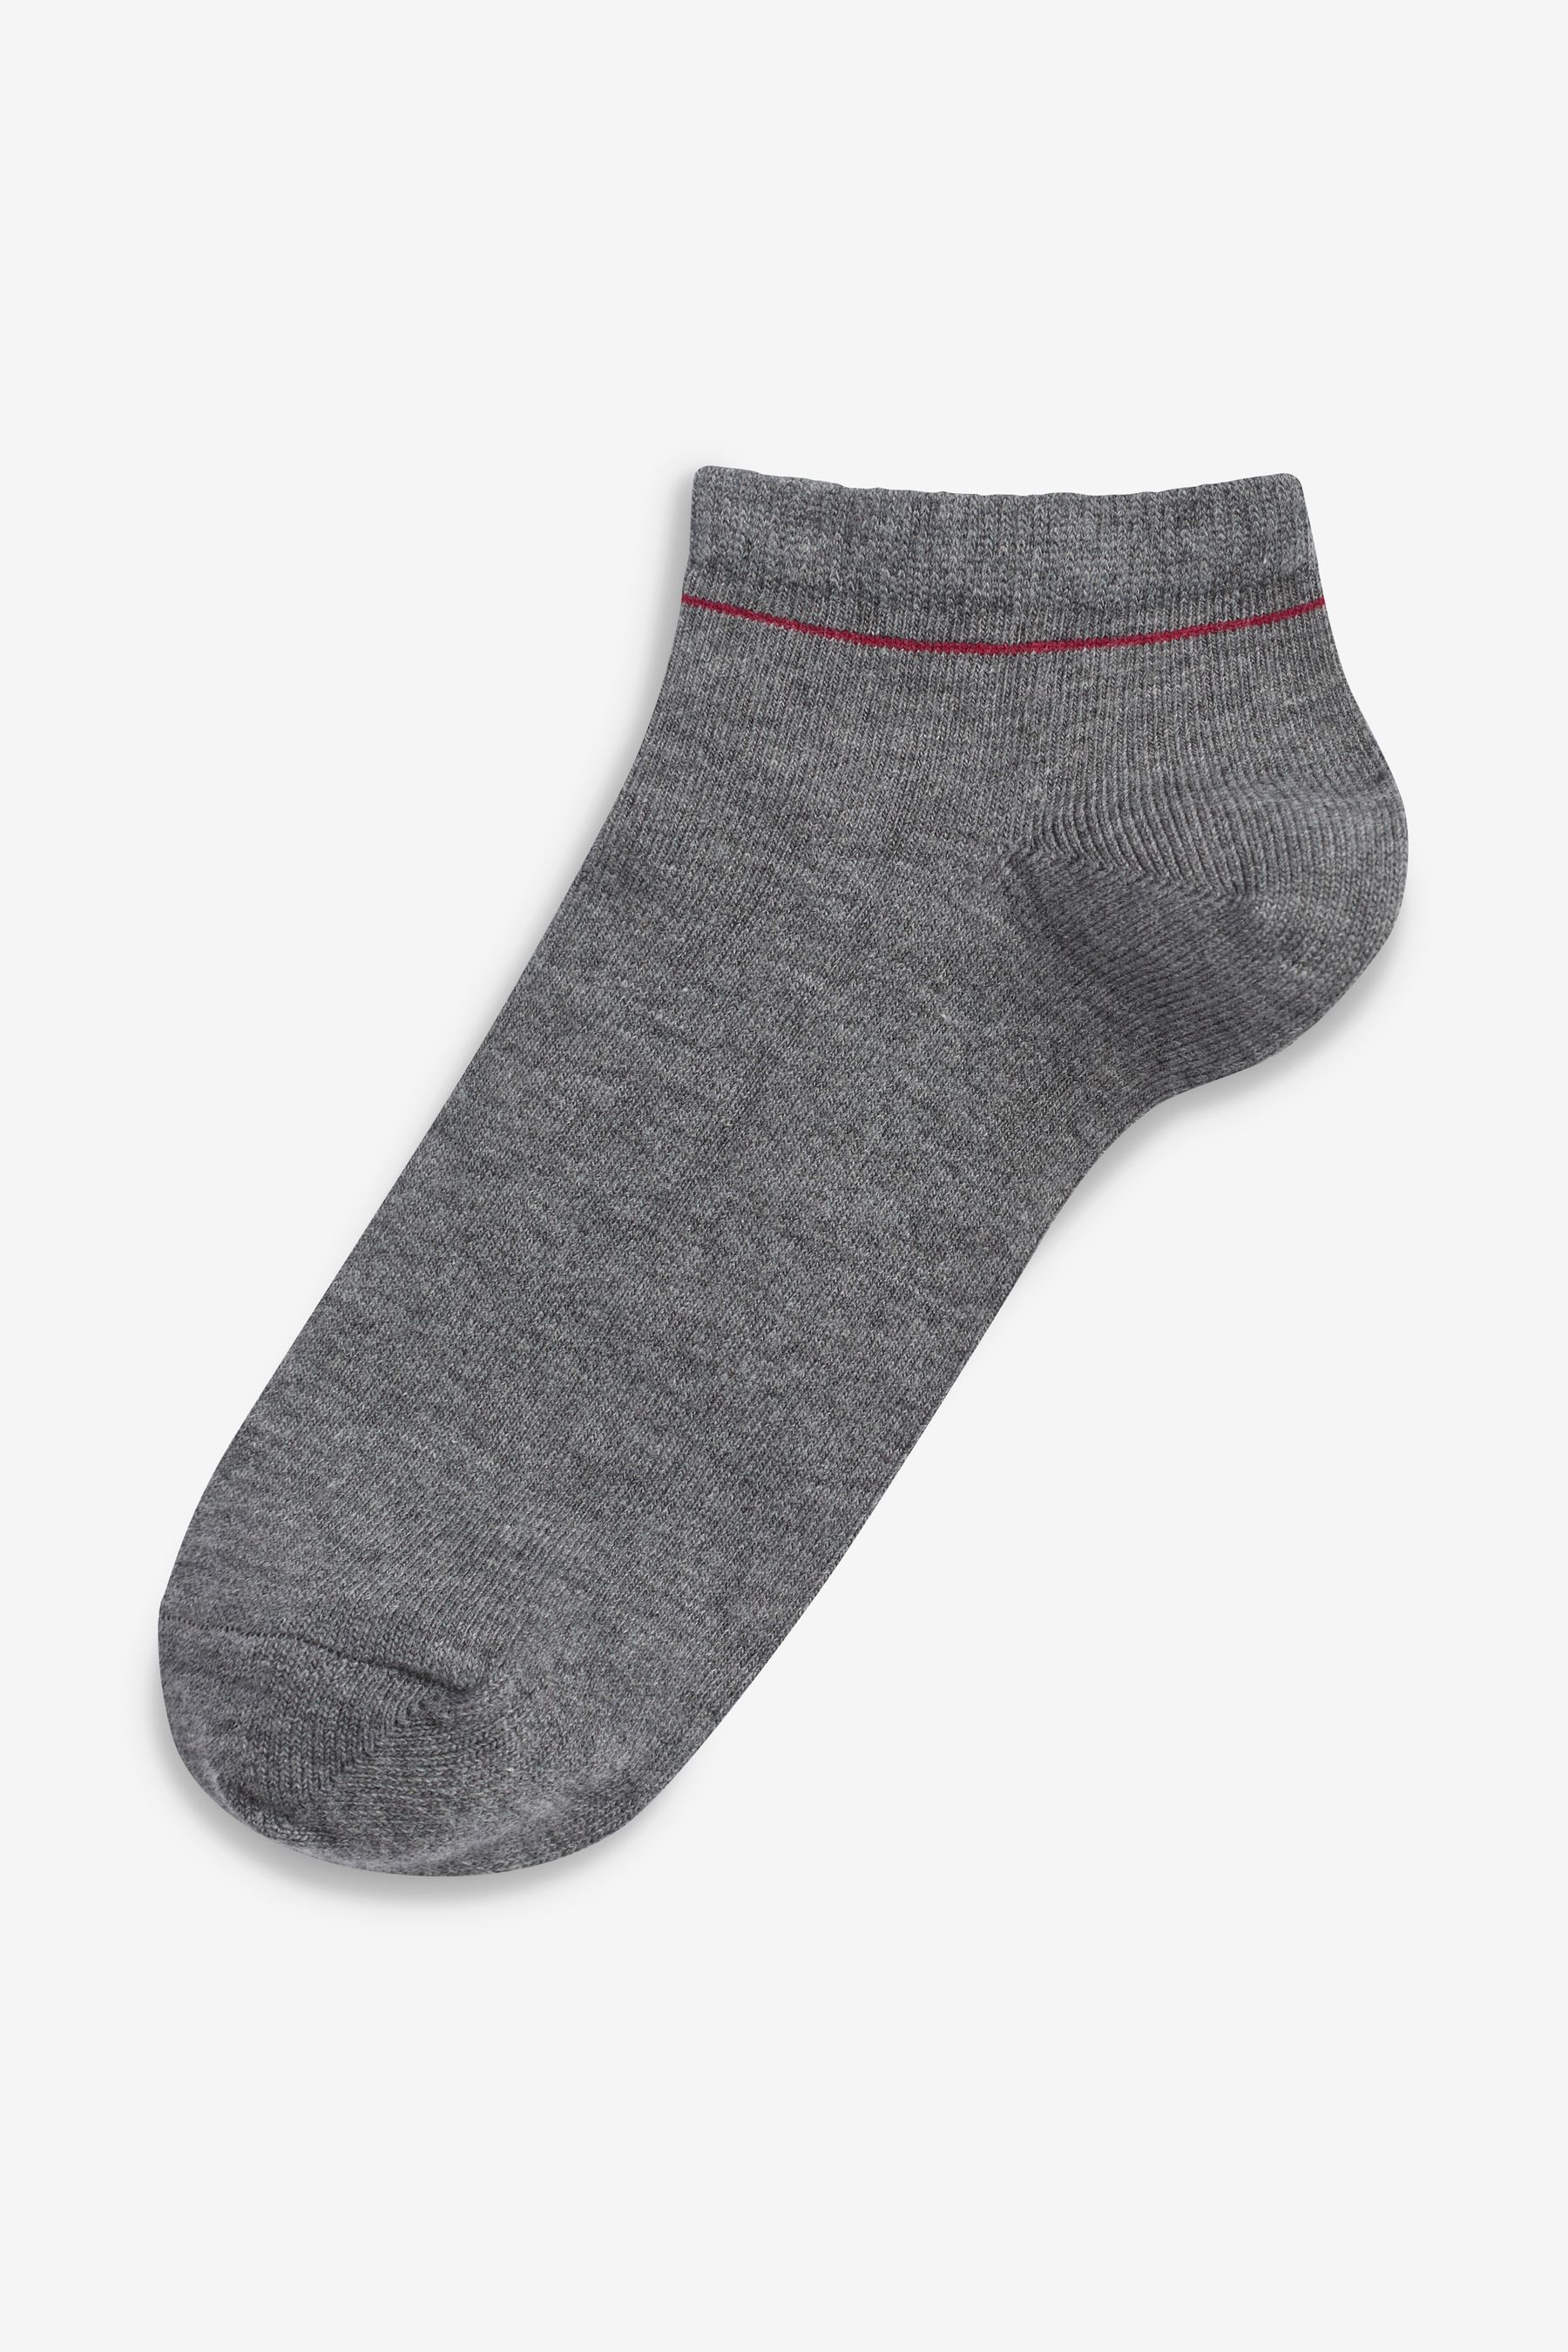 Buy Next Active Sports Trainer Socks 4 Pack from Next Ireland